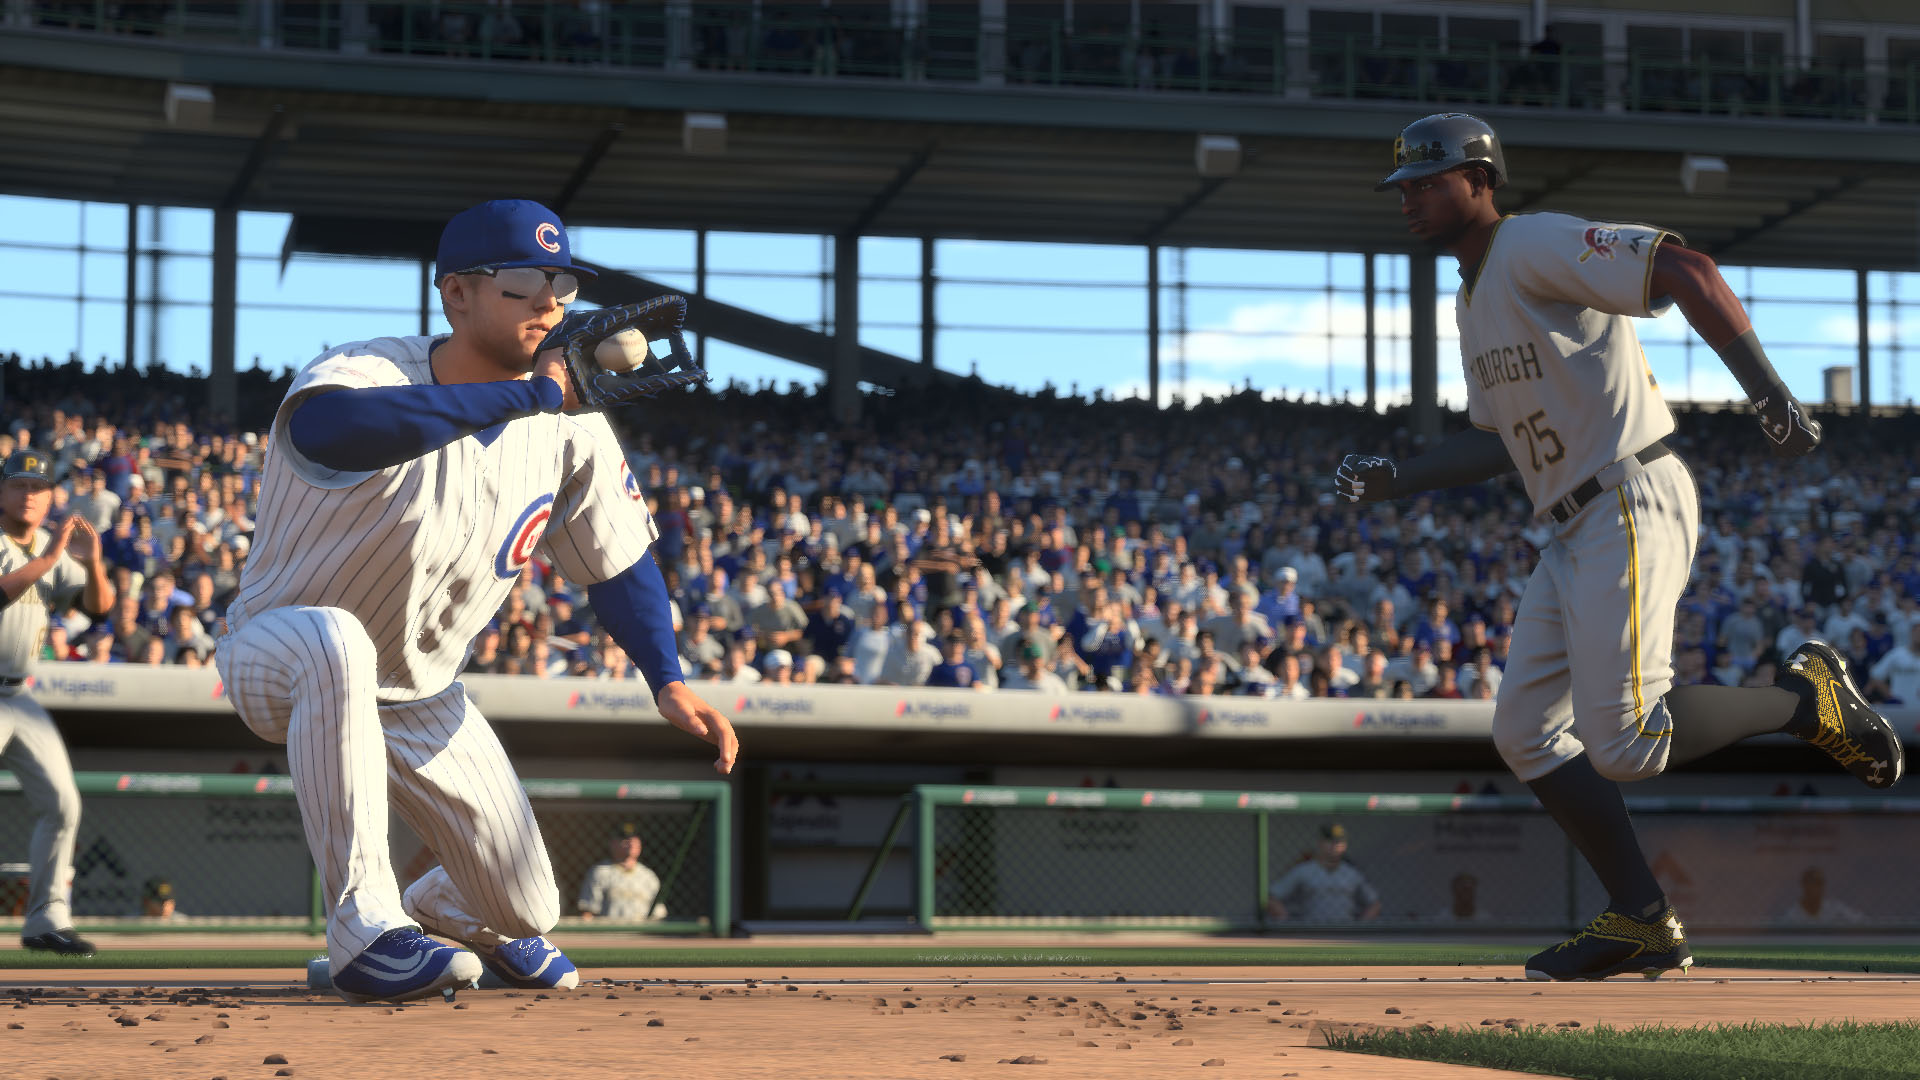 Gallery Image 8 - Mlb 19 The Show Cubs , HD Wallpaper & Backgrounds